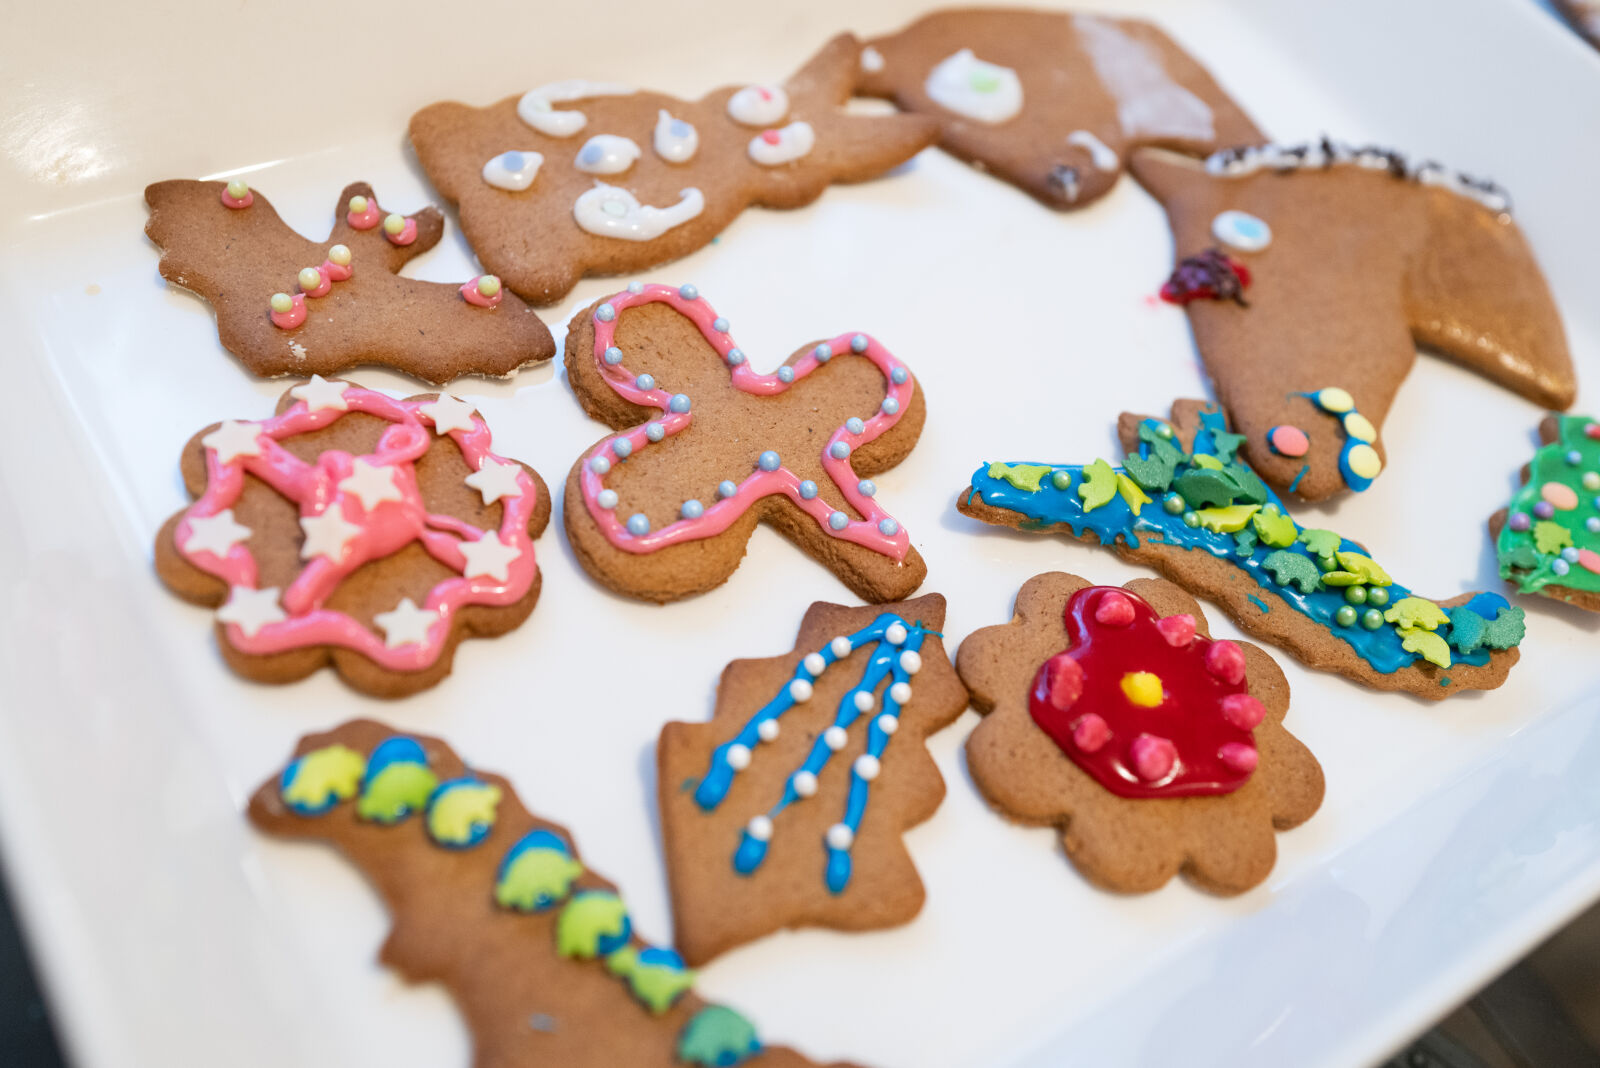 SUMMILUX 1:1.7/28 ASPH. sample photo. Decorated gingerbread photography